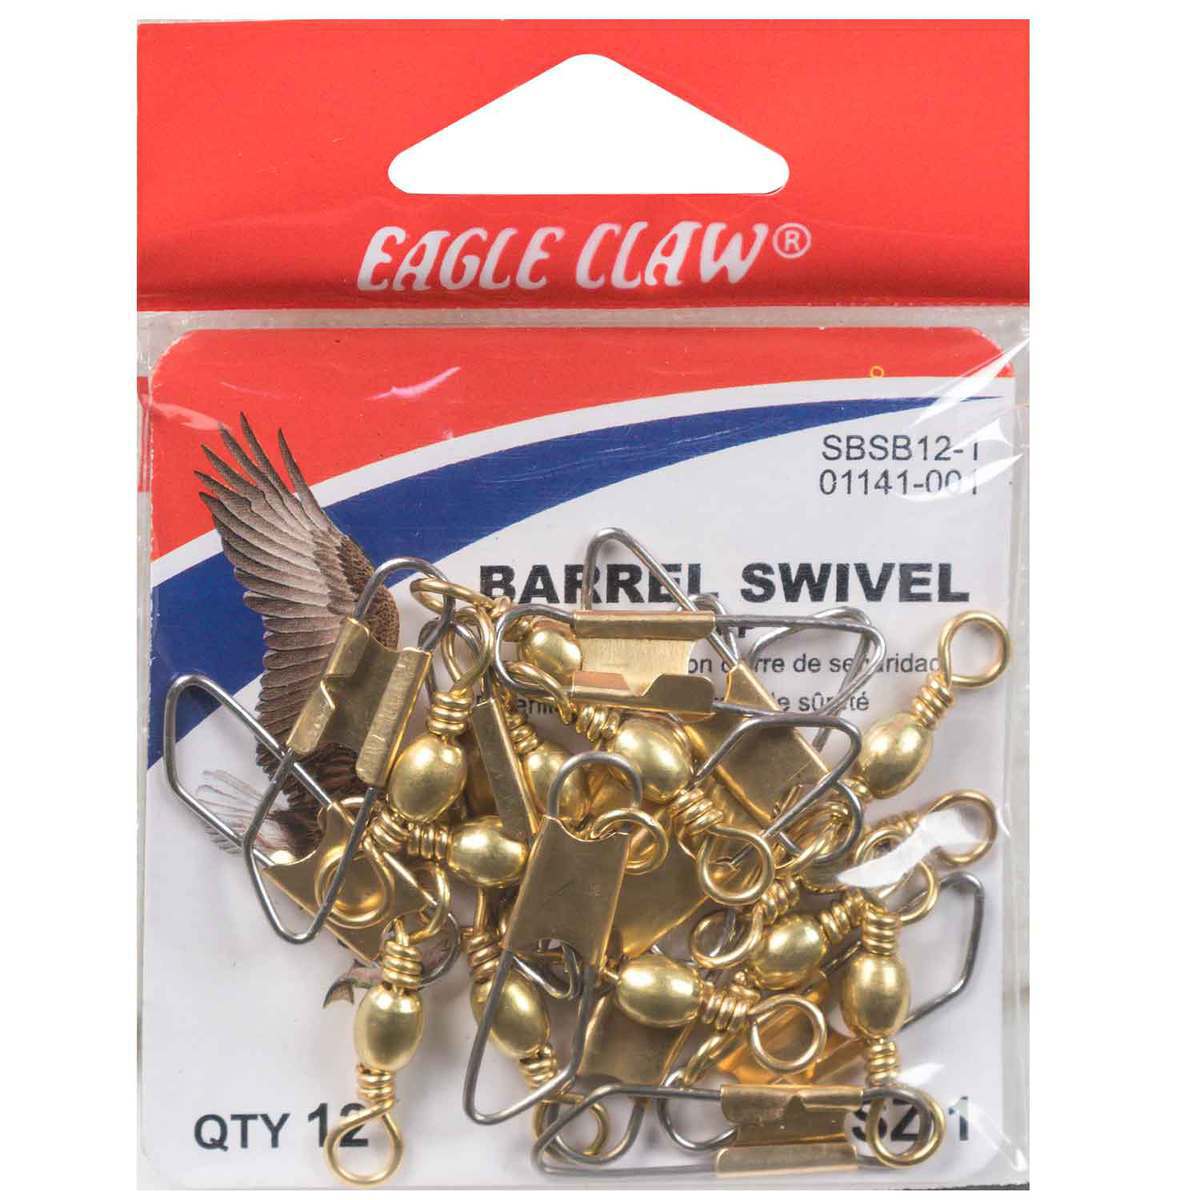 Eagle Claw Size 10 Barrel Swivel w/Safety Snap 3 pkgs Of 7 Fishing